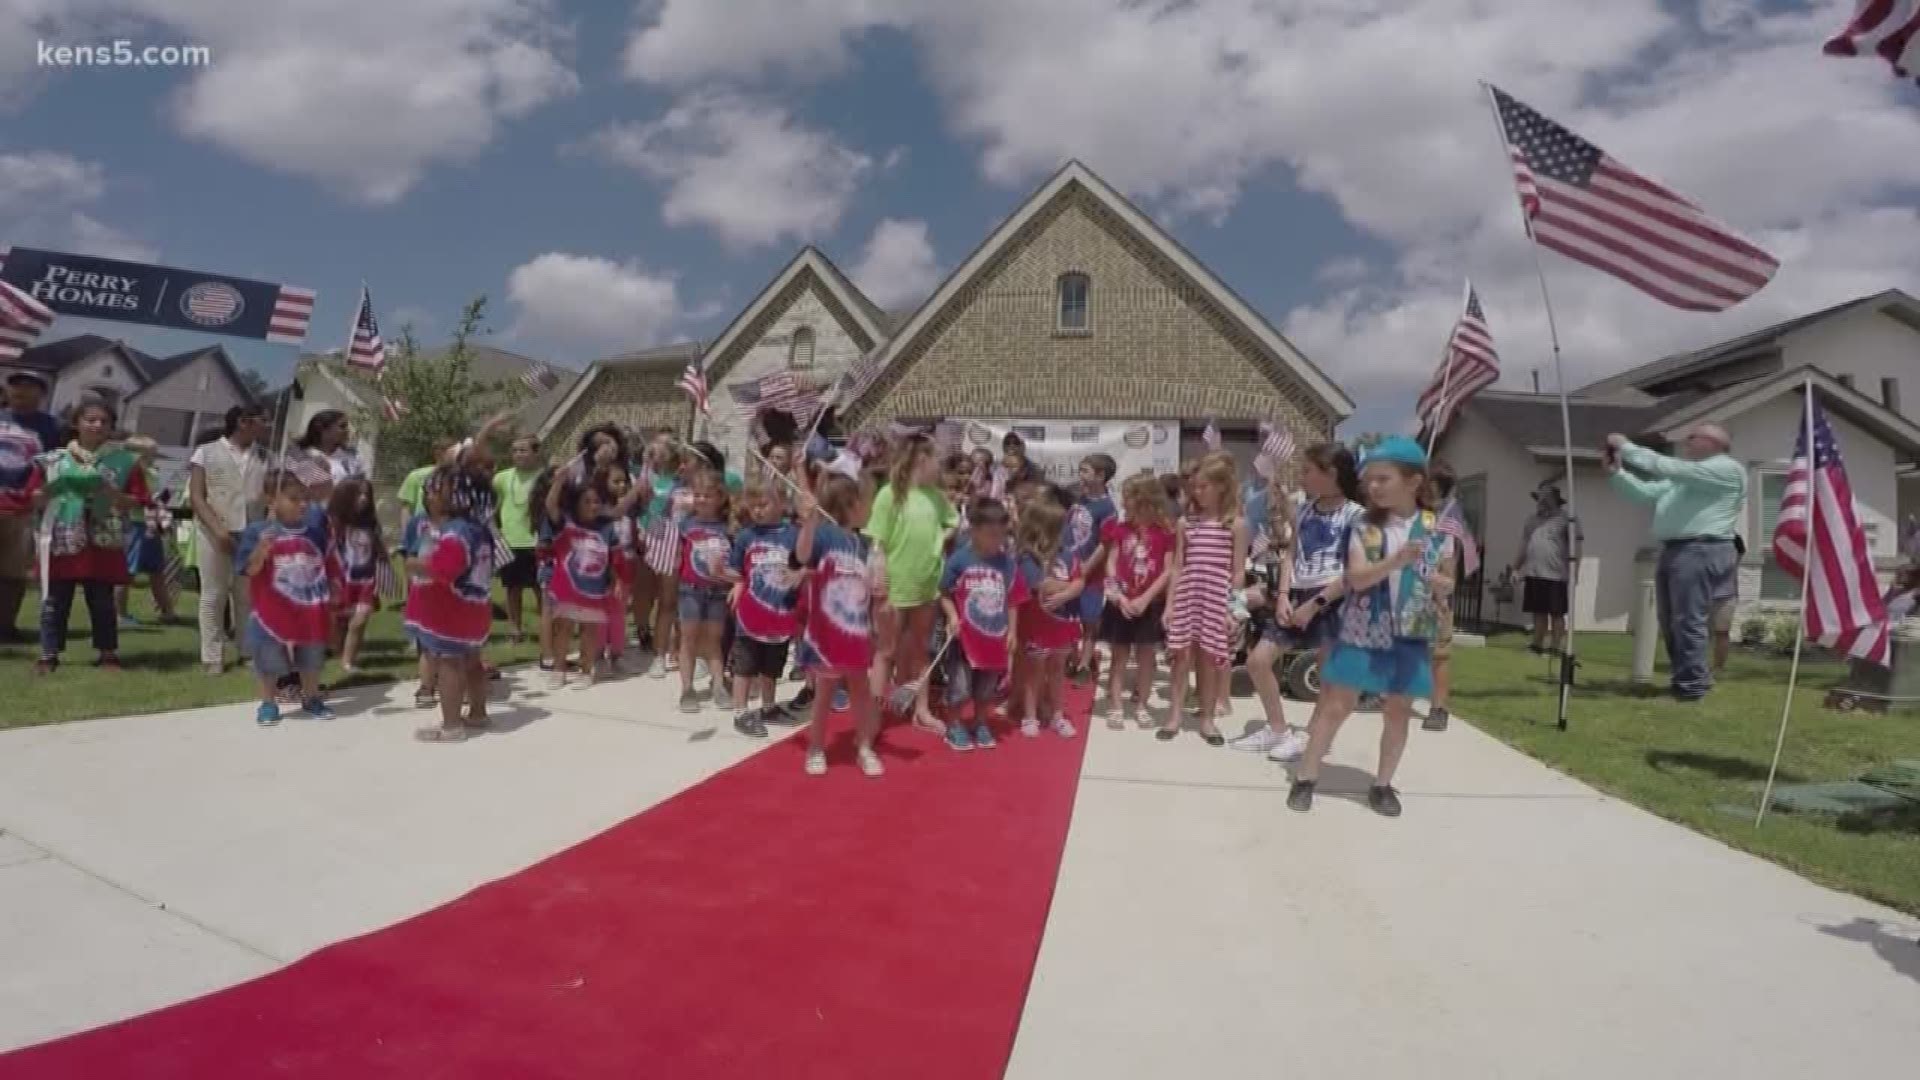 Giving back to a veteran who gave so much to his country. A wounded warrior is getting a specially-fitted home he desperately needs, and singer Lee Greenwood was on hand to help celebrate the big move-in.